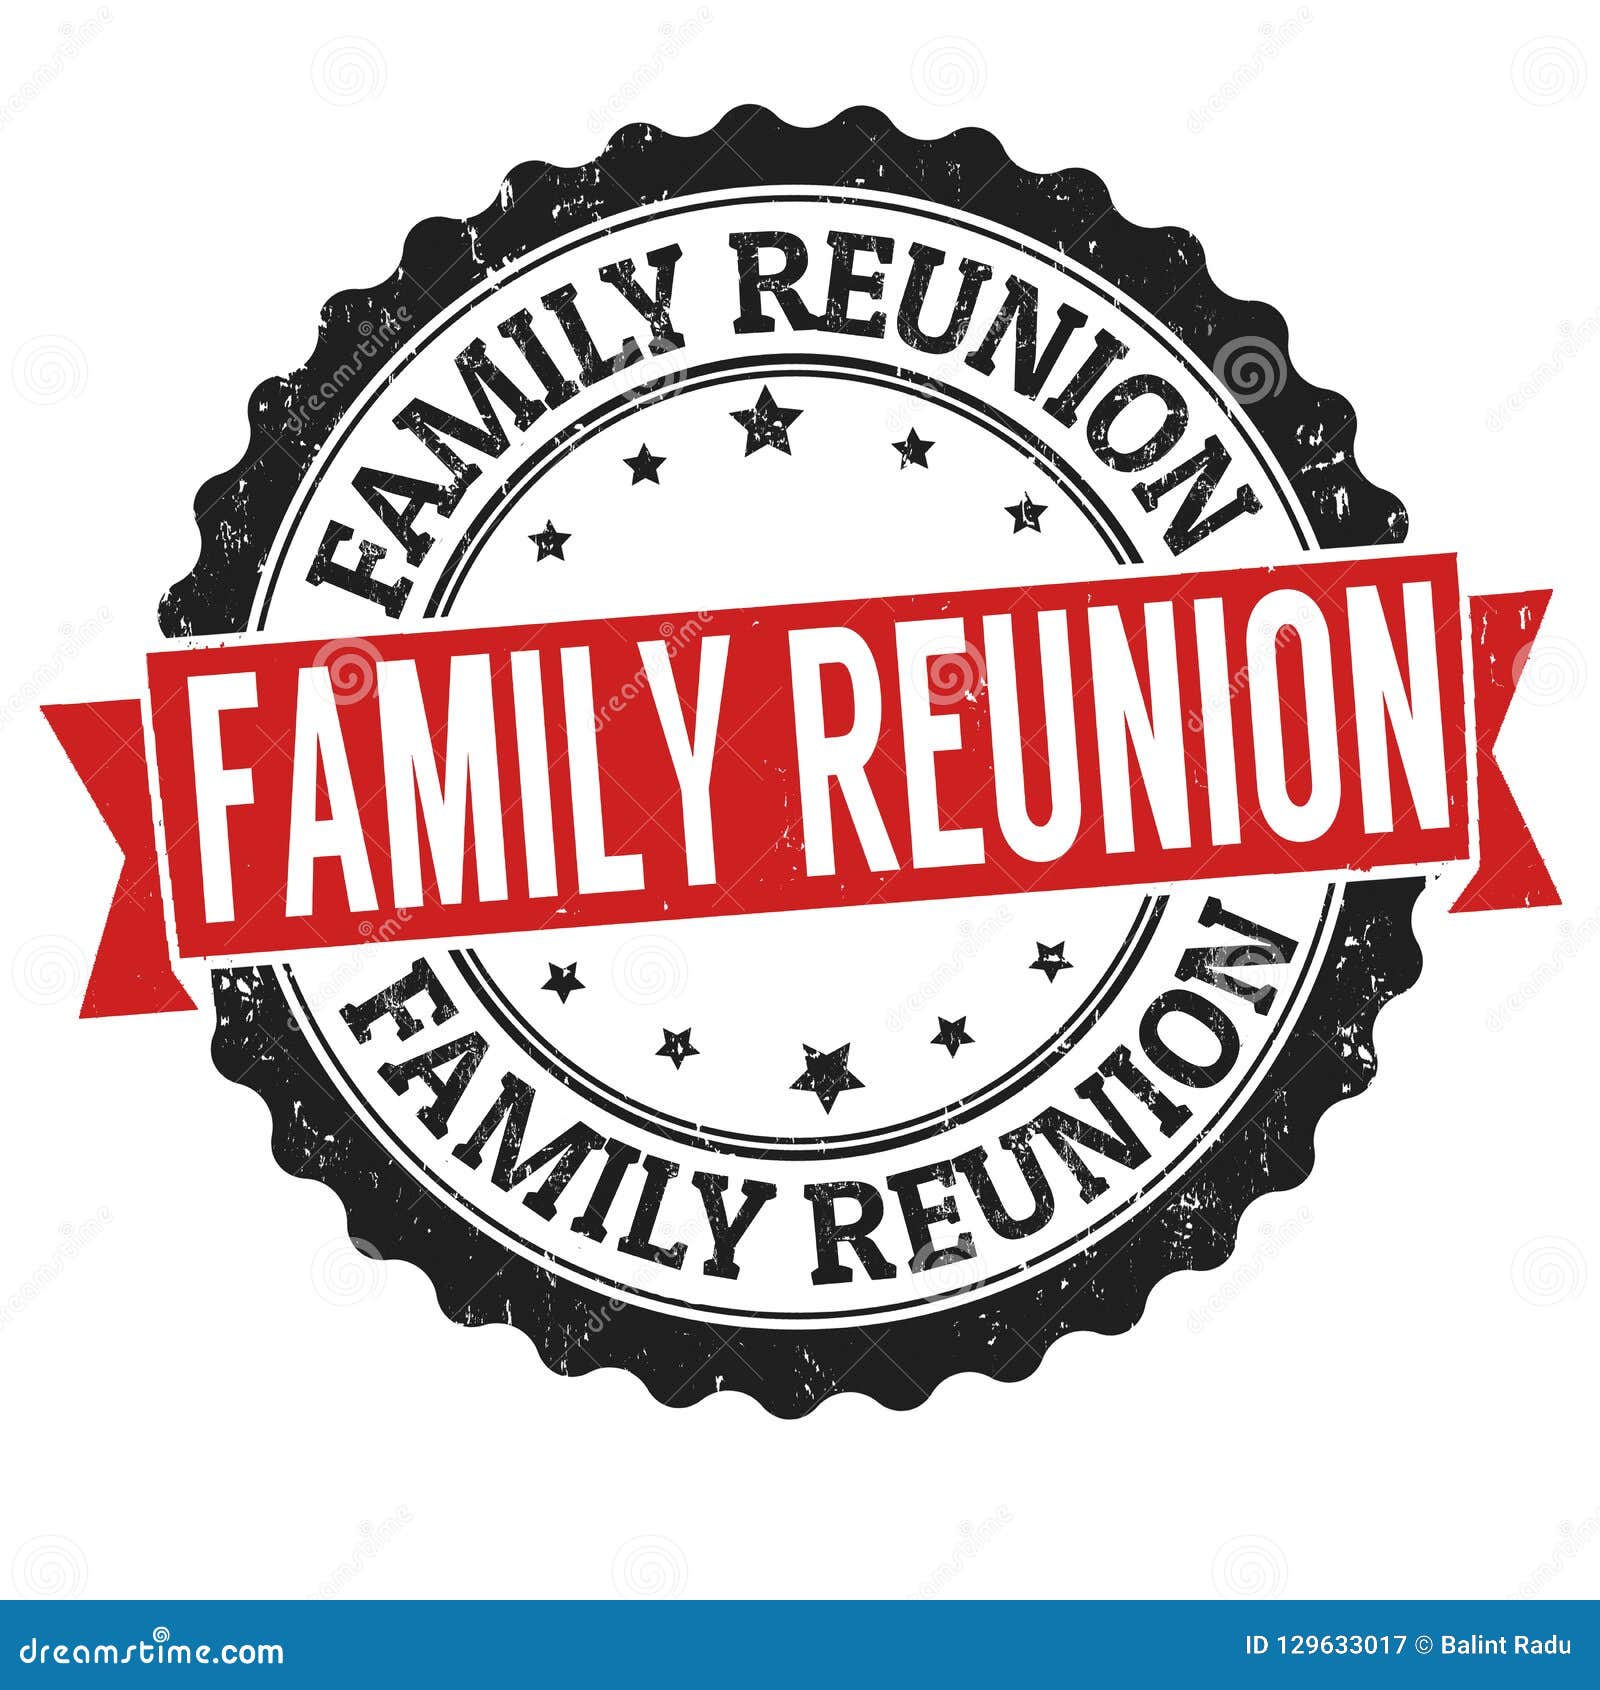 family reunion sign or stamp